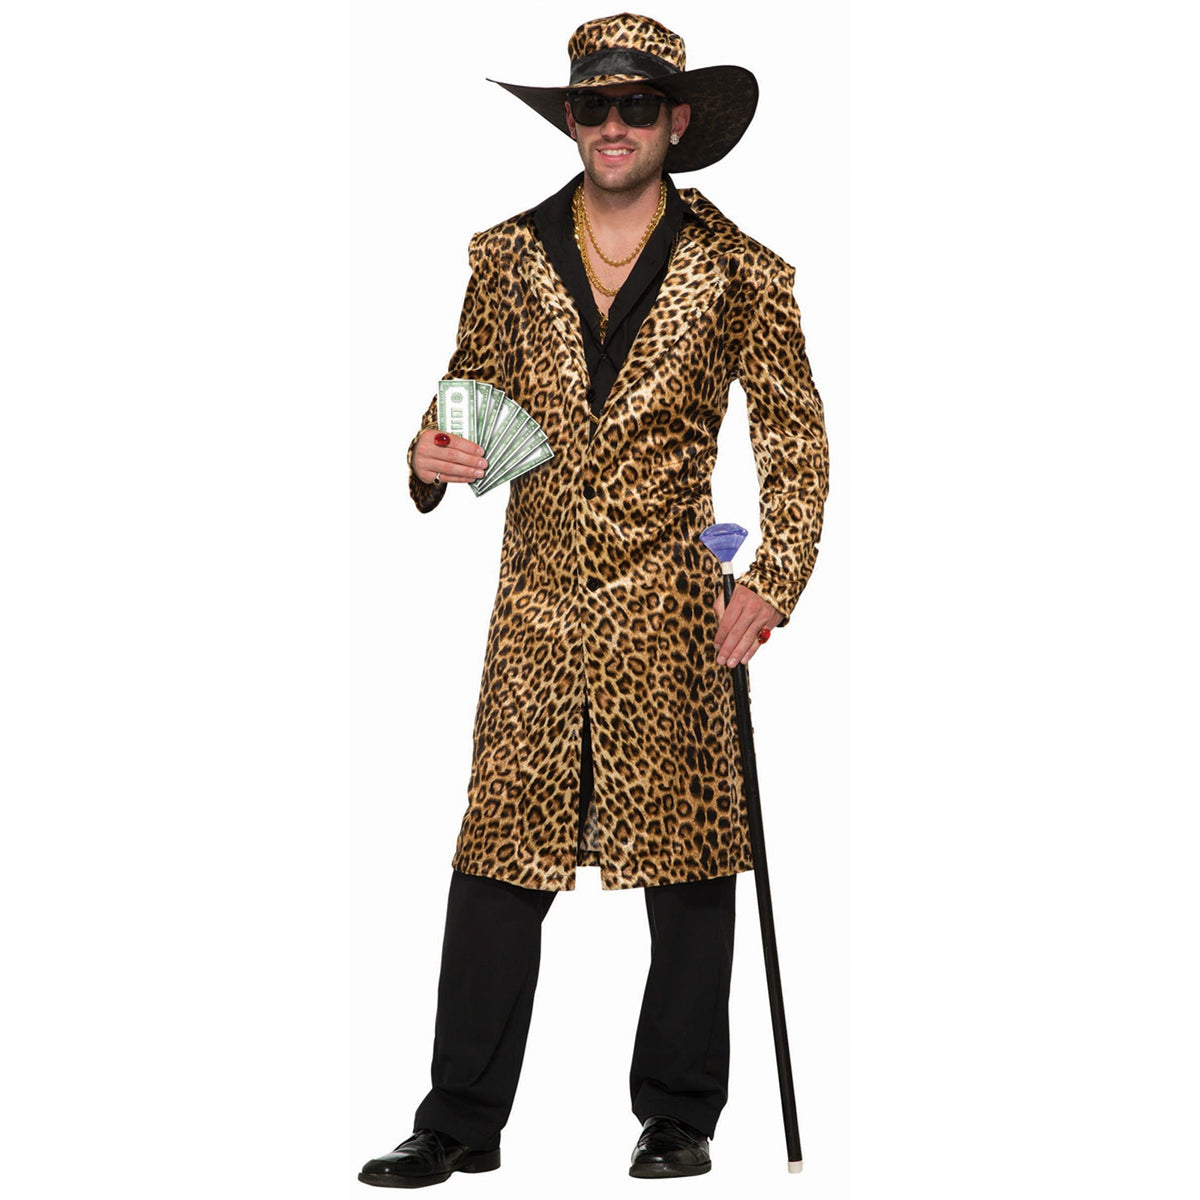 RUBIES II (Ruby Slipper Sales) Costumes Pimp Funky Leopard Costume for Adults 721773788864